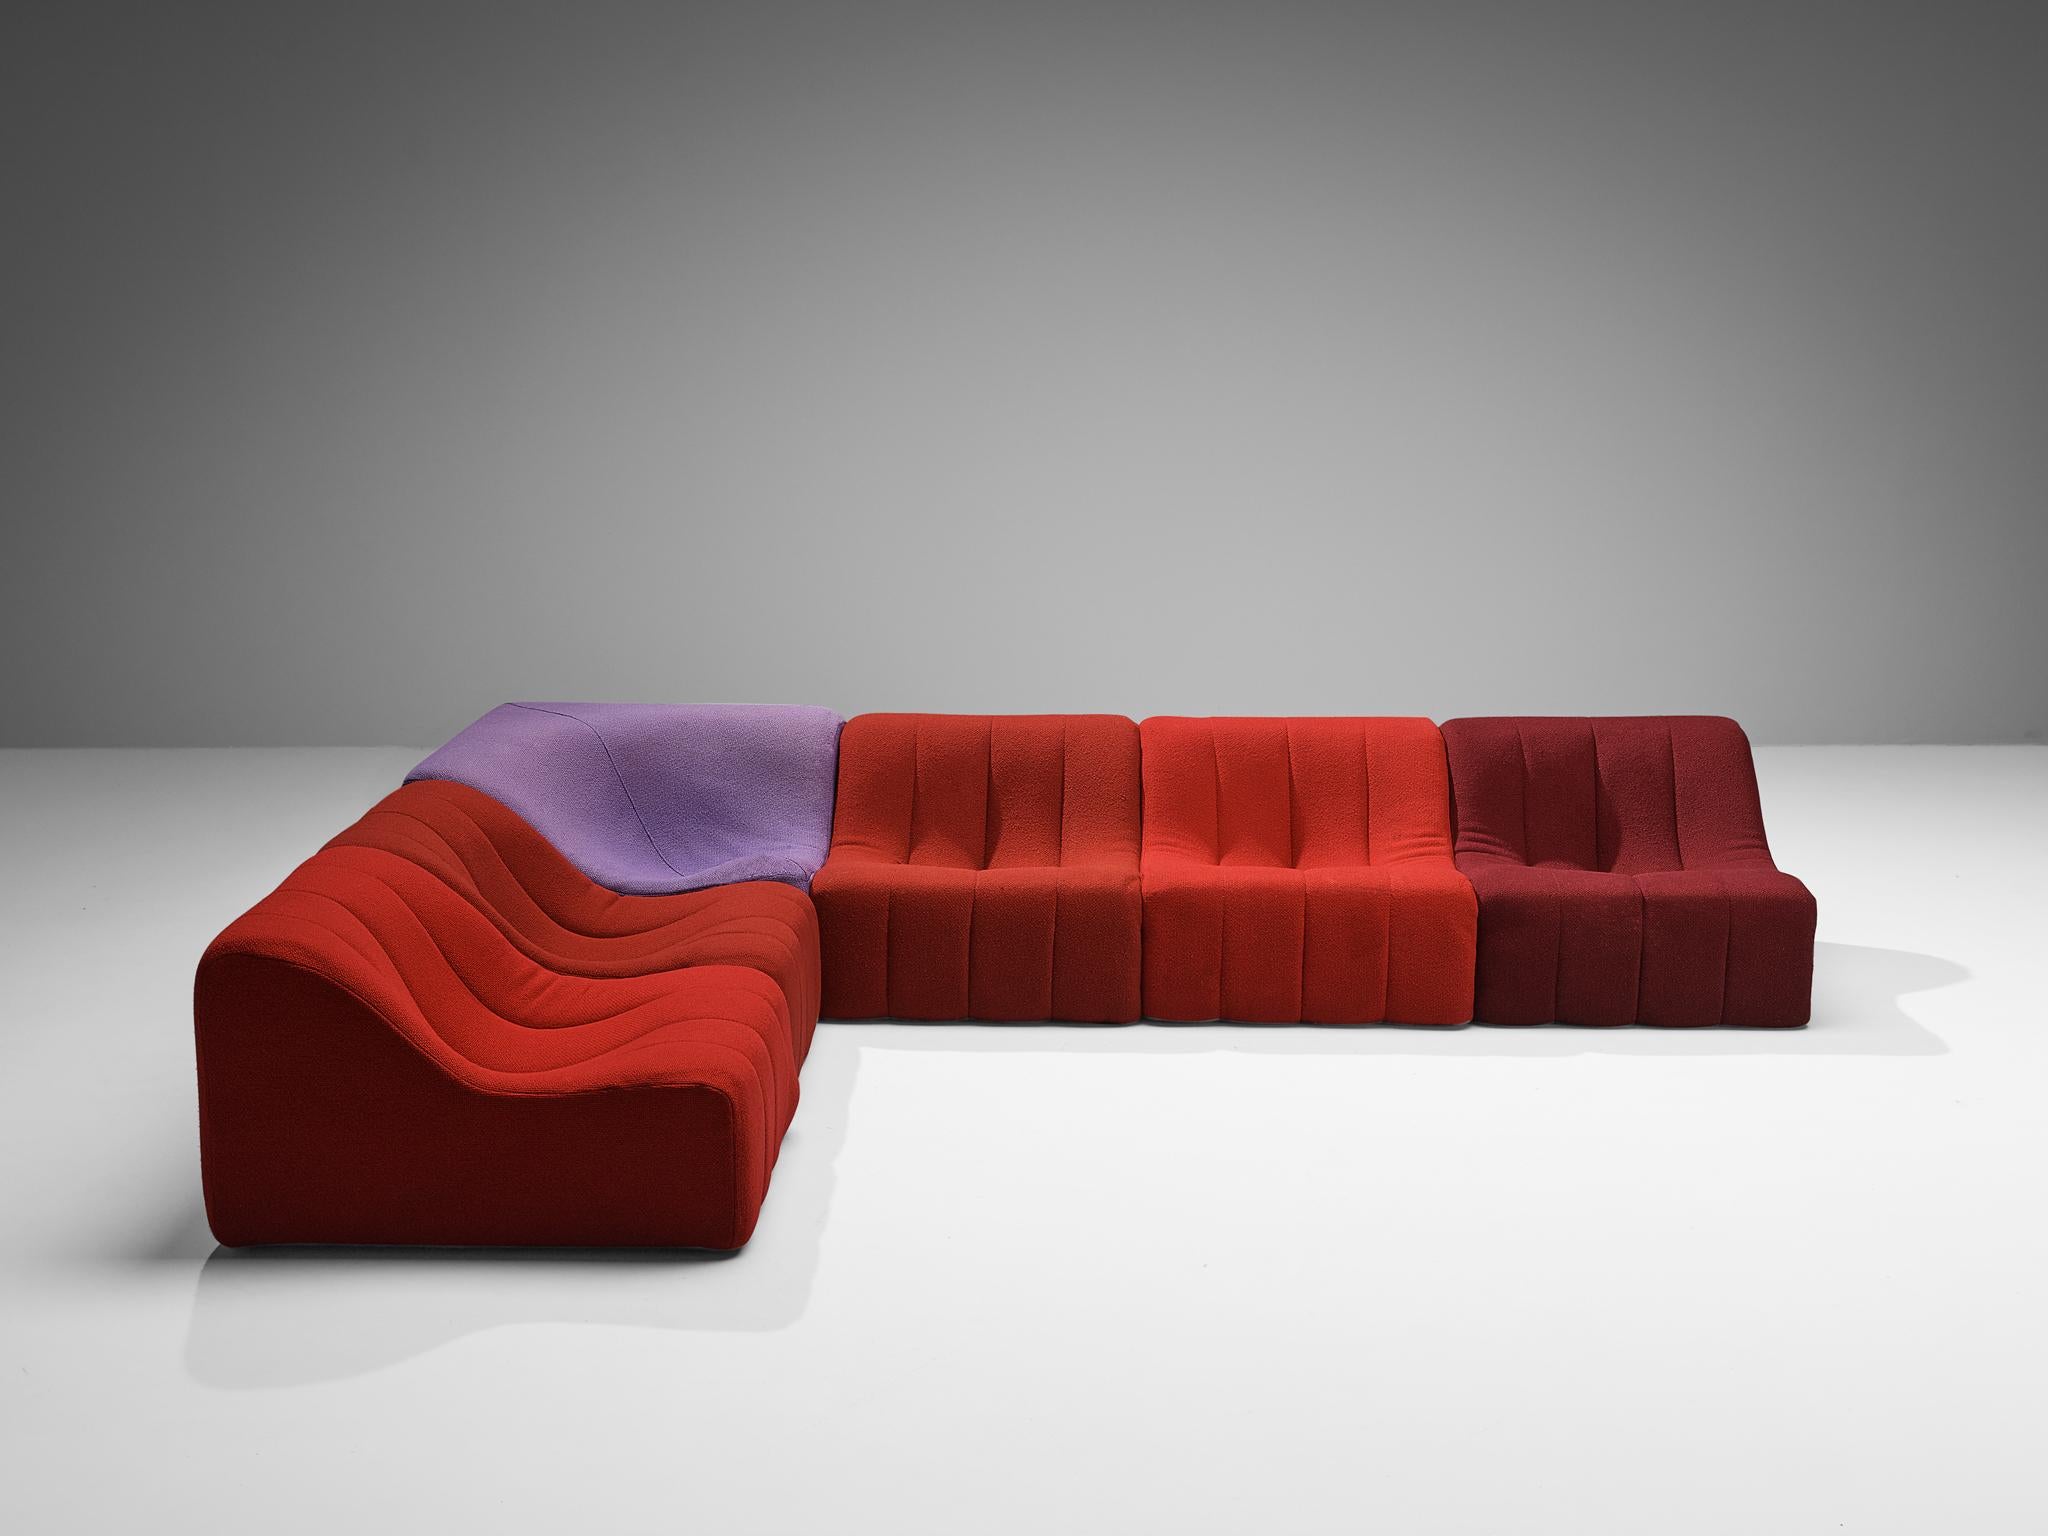 Fabric Kwok Hoi Chan for Steiner 'Chromatic' Modular Sofa in Red Purple Colors  For Sale